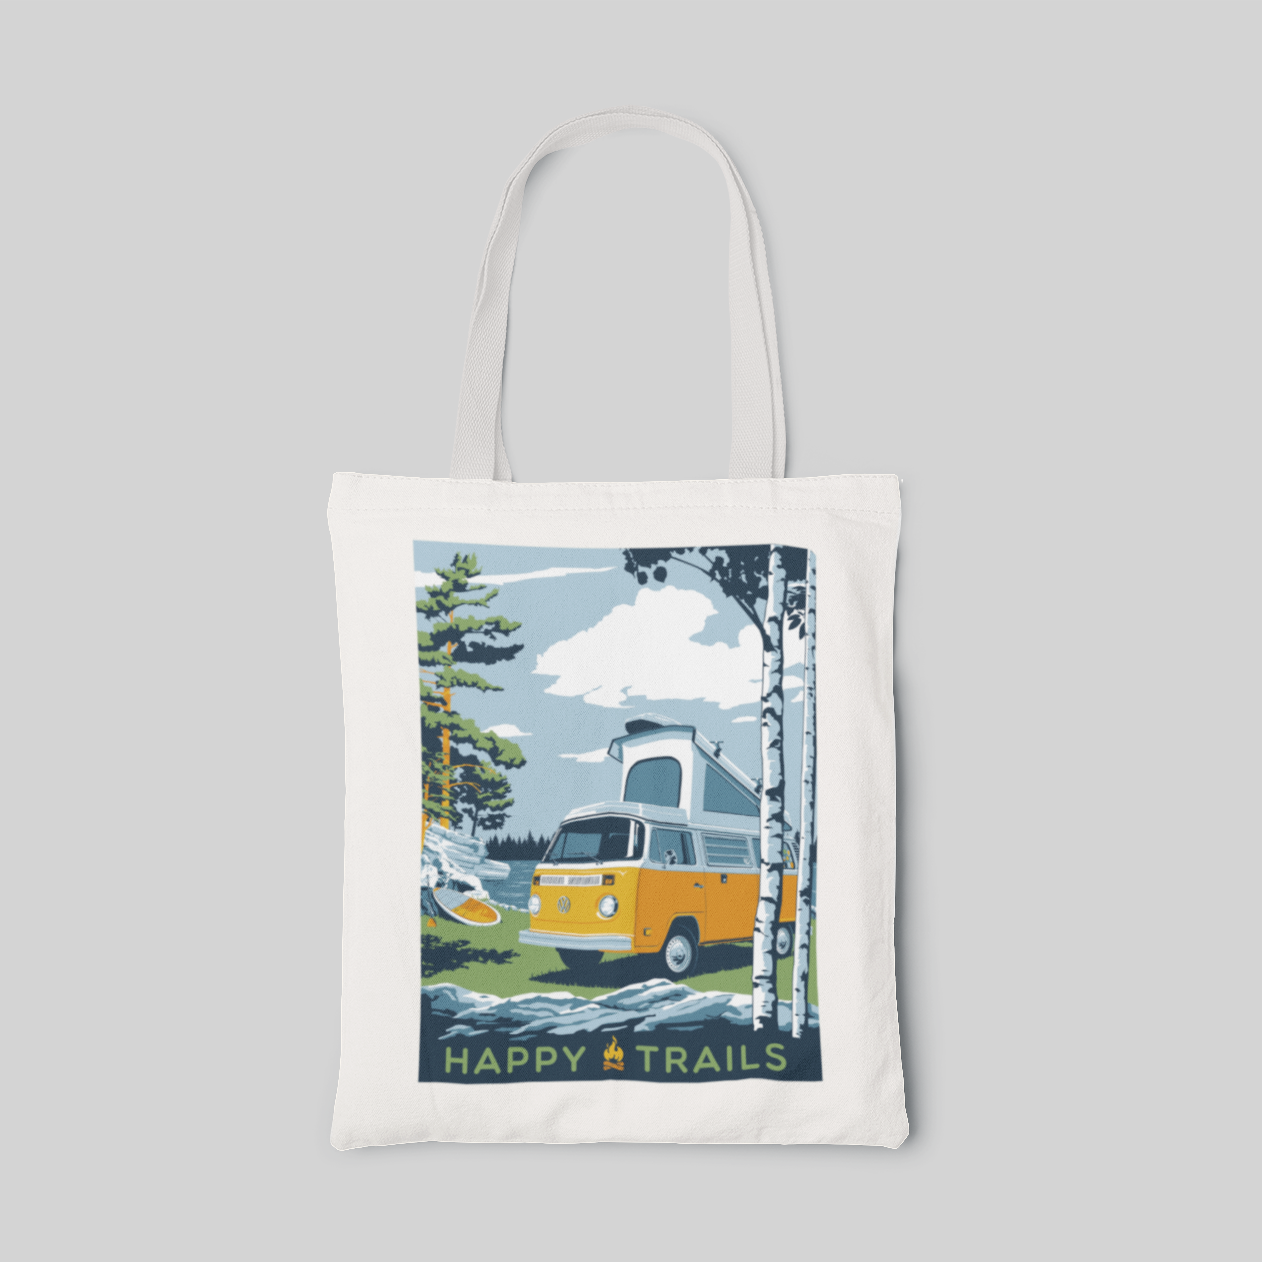 White nature designed tote bag with forest illustrations, yellow camping bus and "happy trails" lettering at the bottom, front side